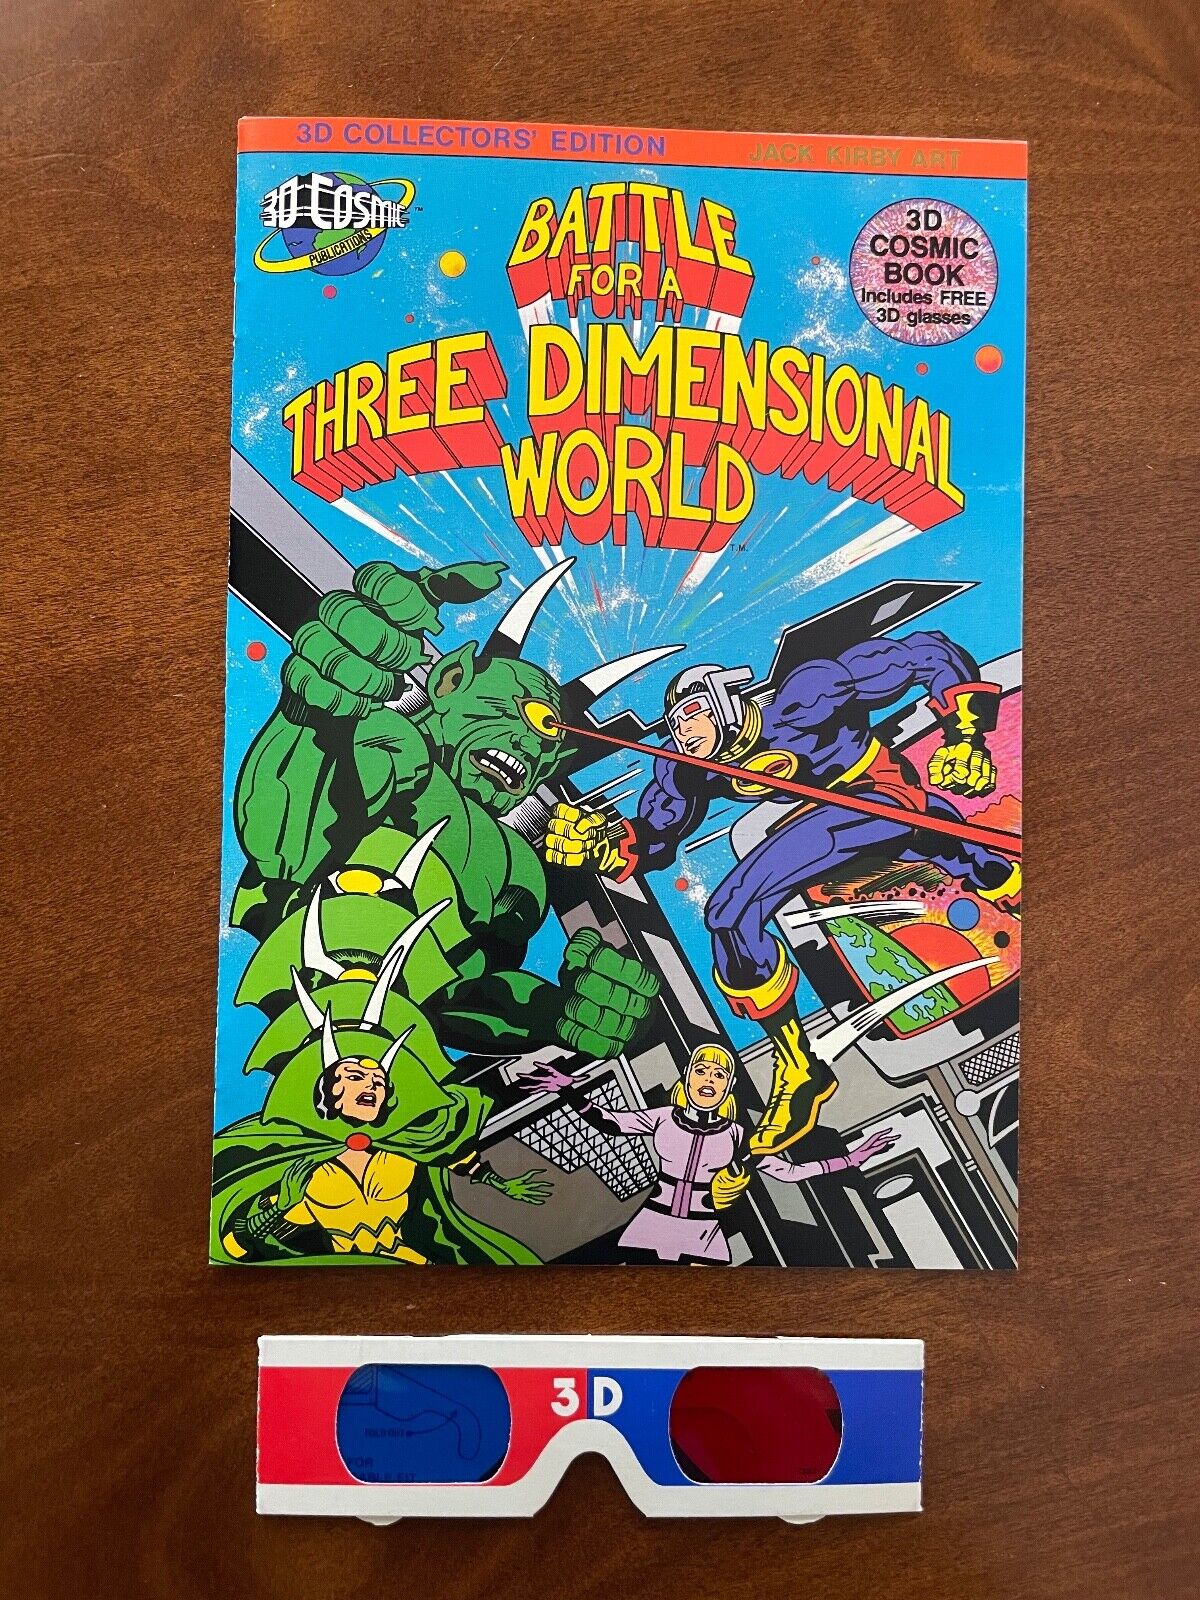 Battle for a Three Dimensional World, 3D Cosmic, (1982) - with 3D Glasses